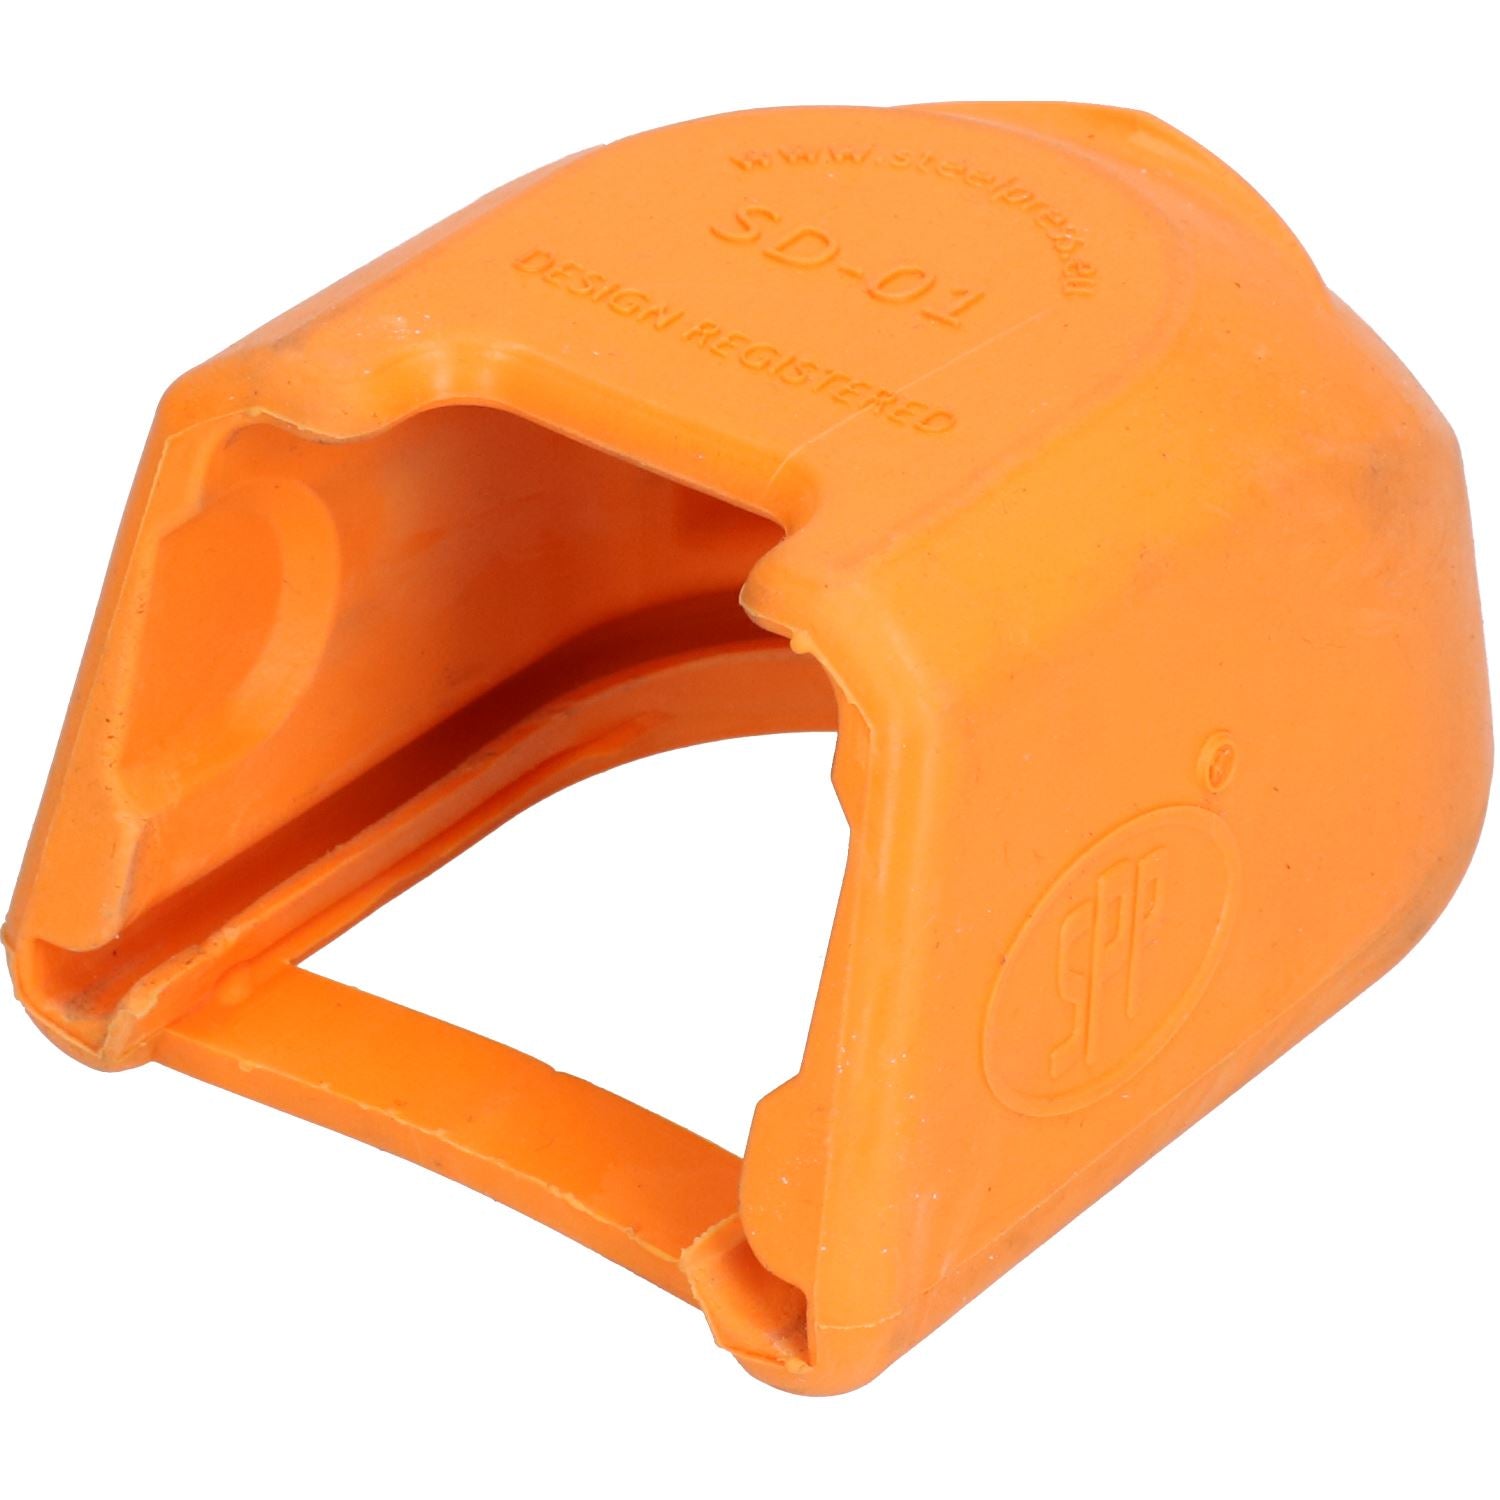 Trailer Pressed Steel Hitch Coupling Soft Cover Protector High Visibility Orange